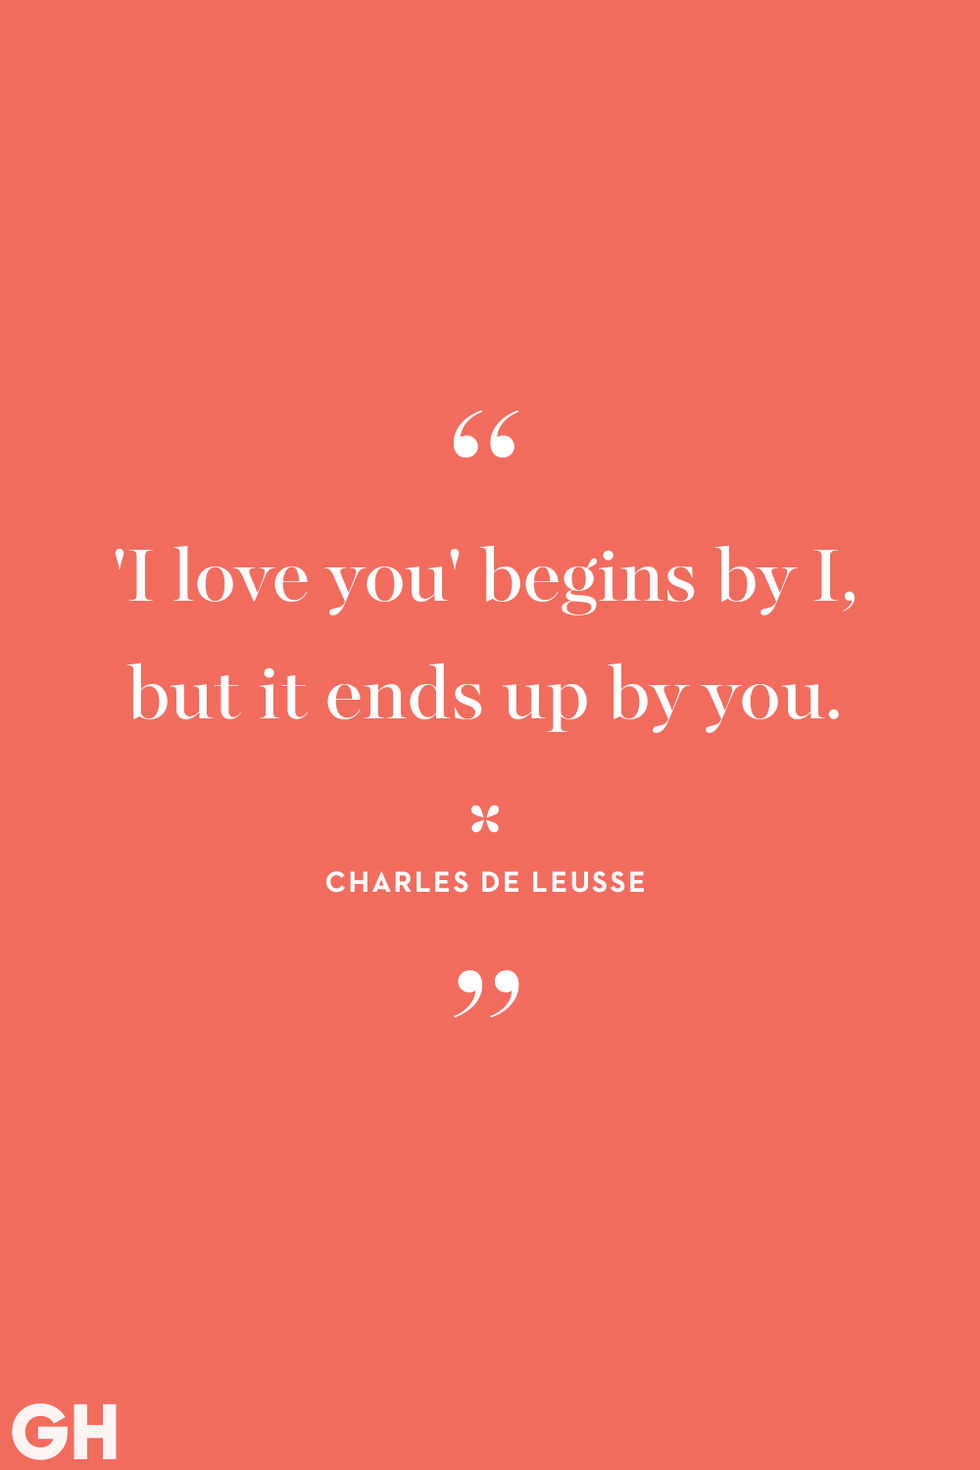 Love and cherish you.  Love quotes for girlfriend, Love my wife quotes,  Pure love quotes